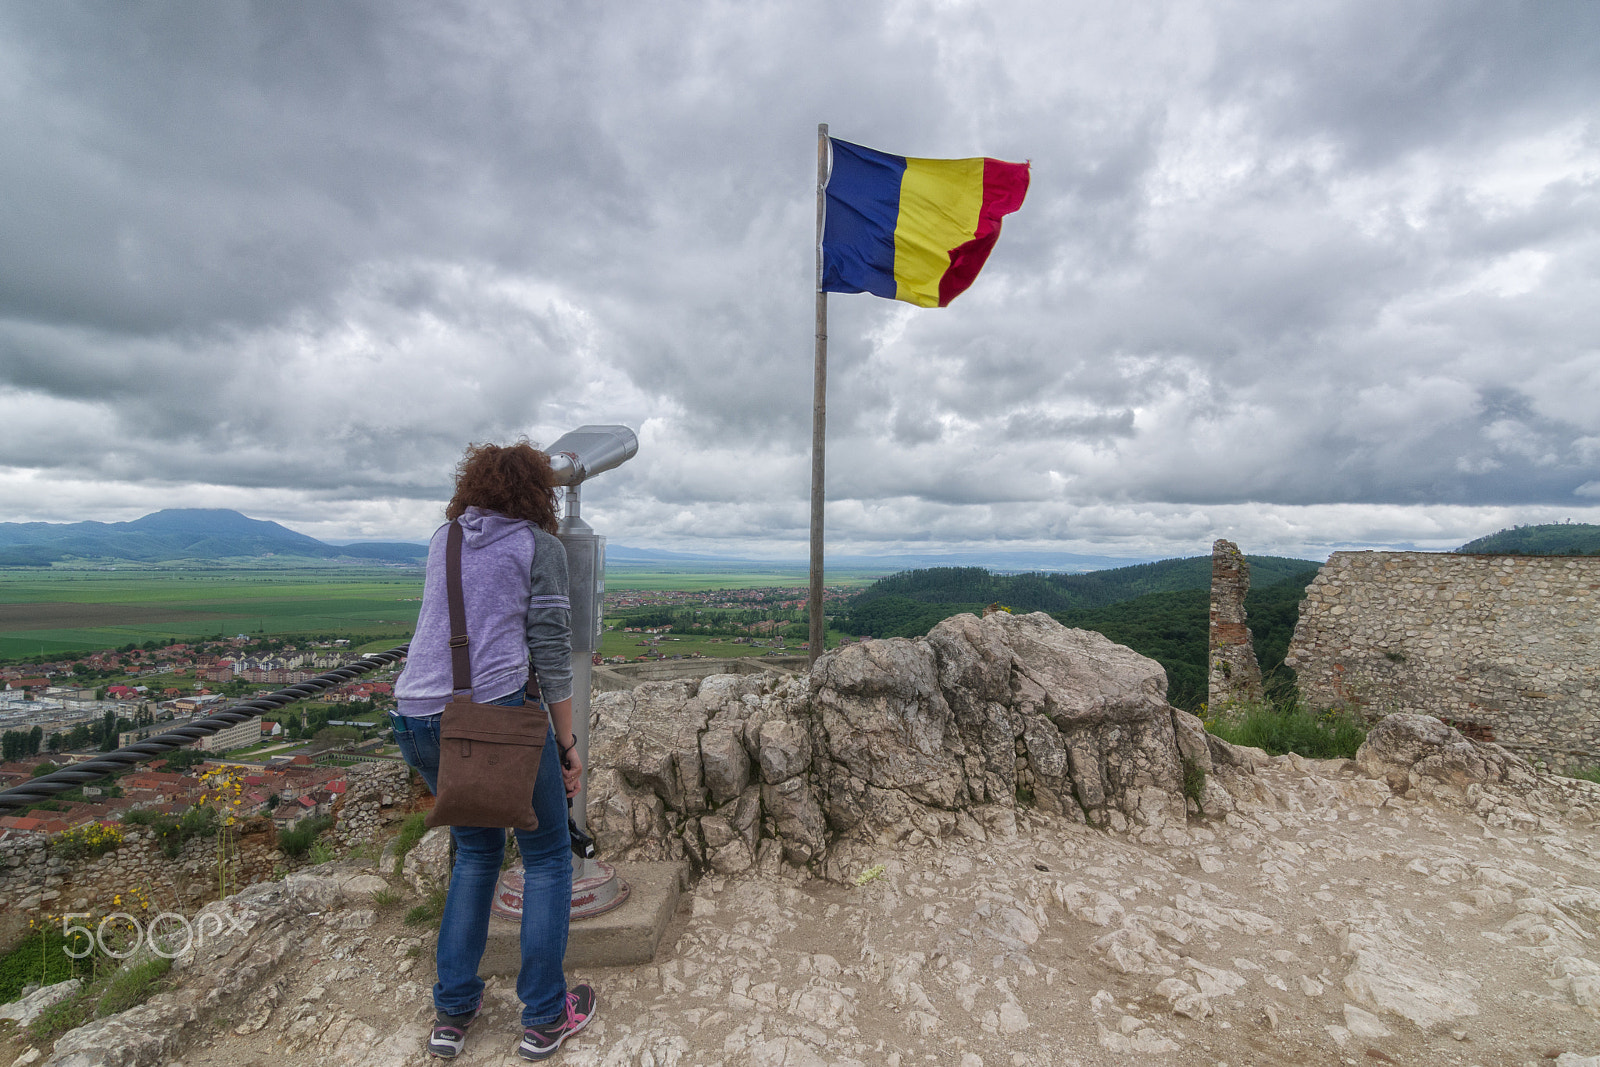 Samsung/Schneider D-XENON 12-24mm F4 ED AL [IF] sample photo. Looking the romanian flag photography